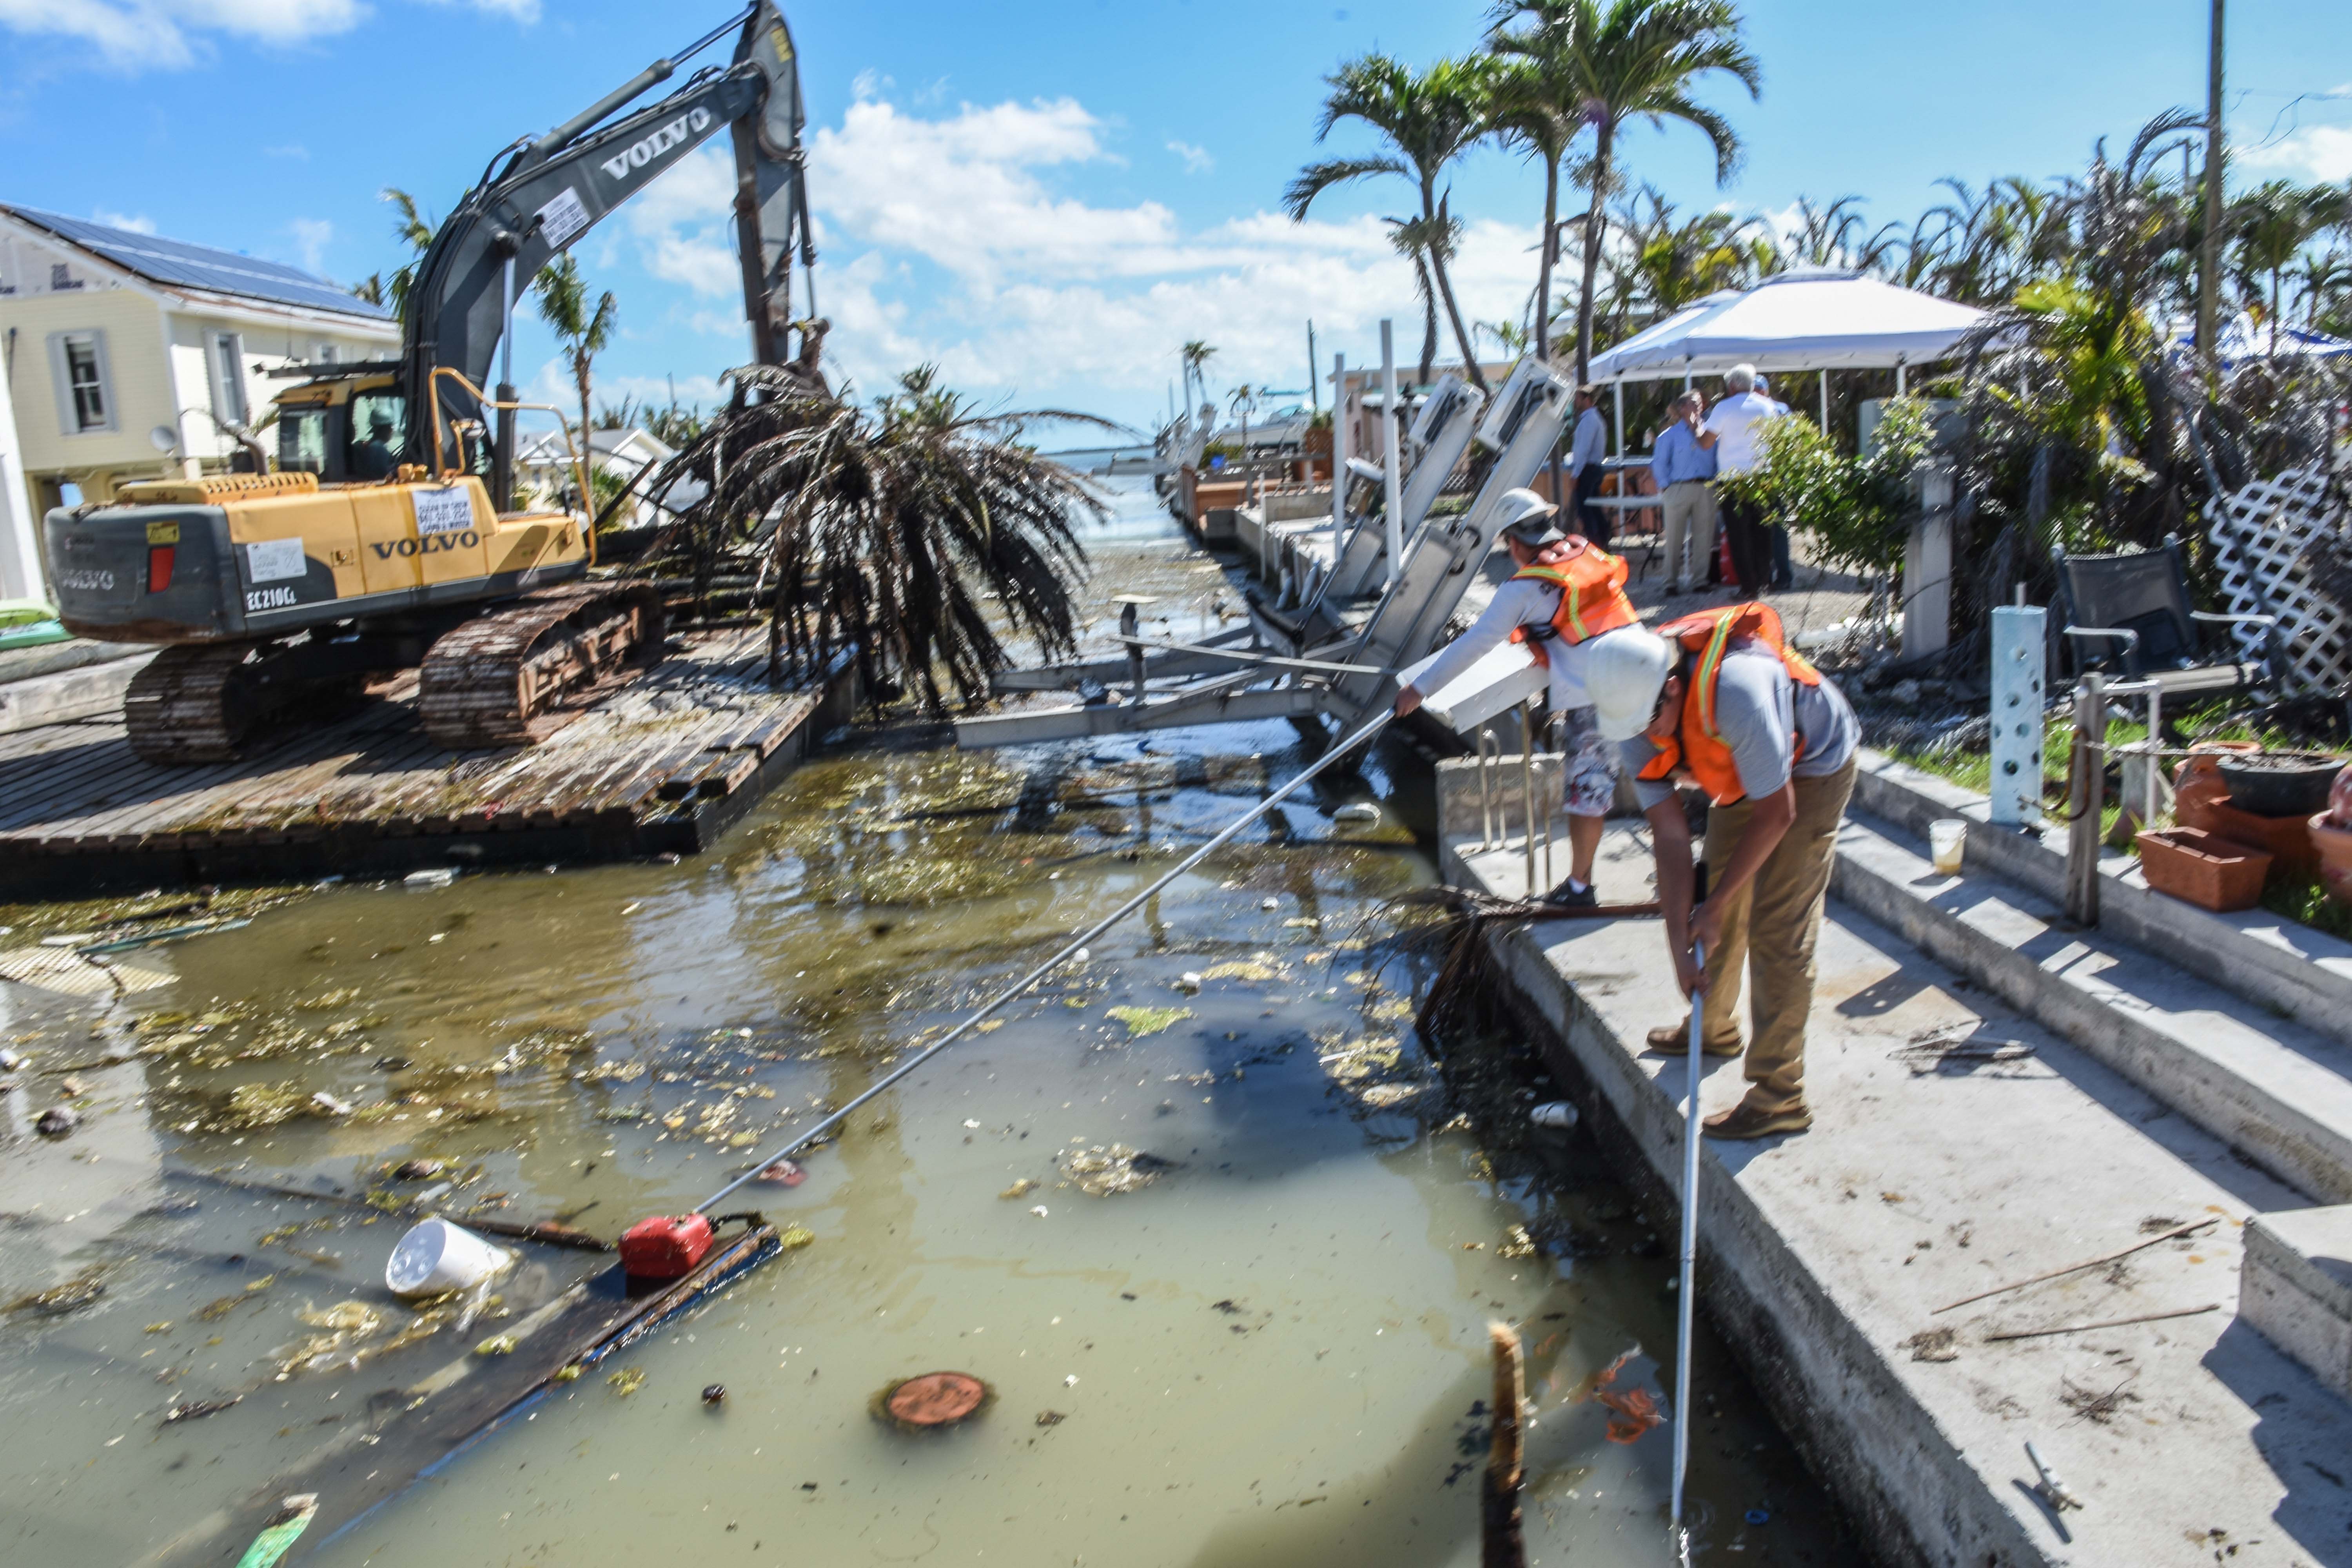 Monroe County Gets $49 Million Grant To Remove Debris From Canals